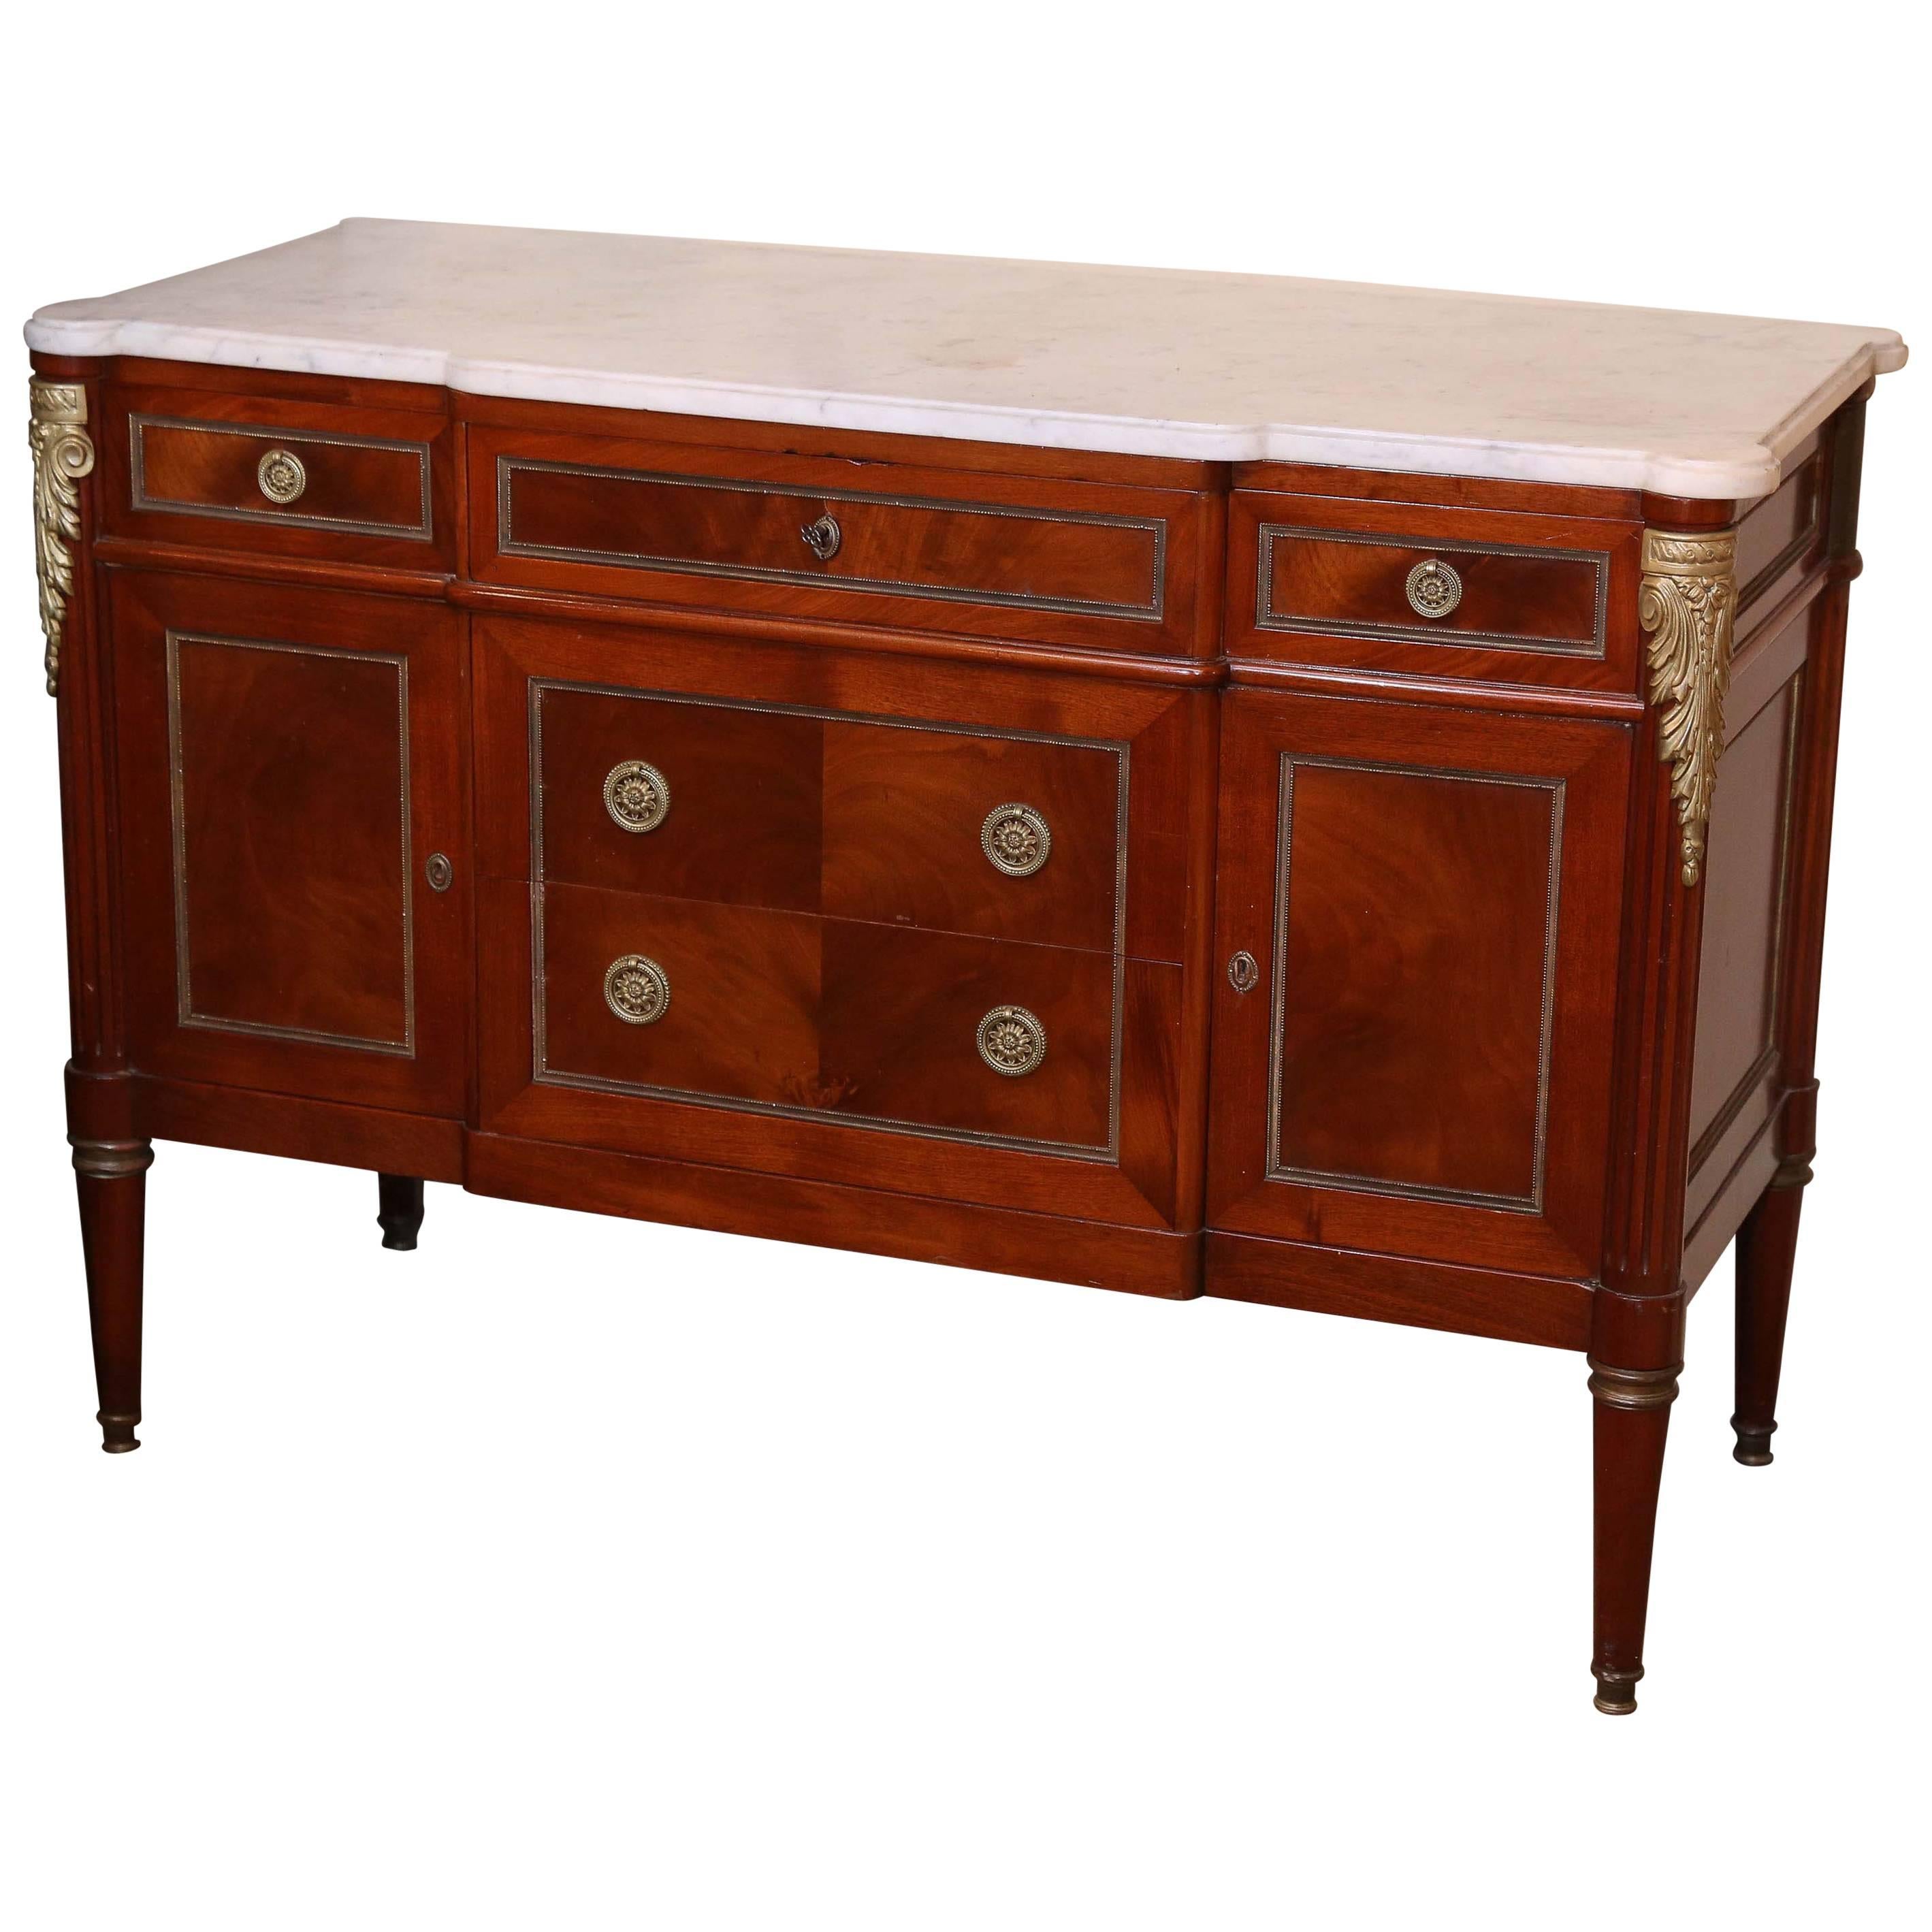 Louis XVI 19th Century Marble-Top Chest of Drawers or Commode, Mahogany For Sale